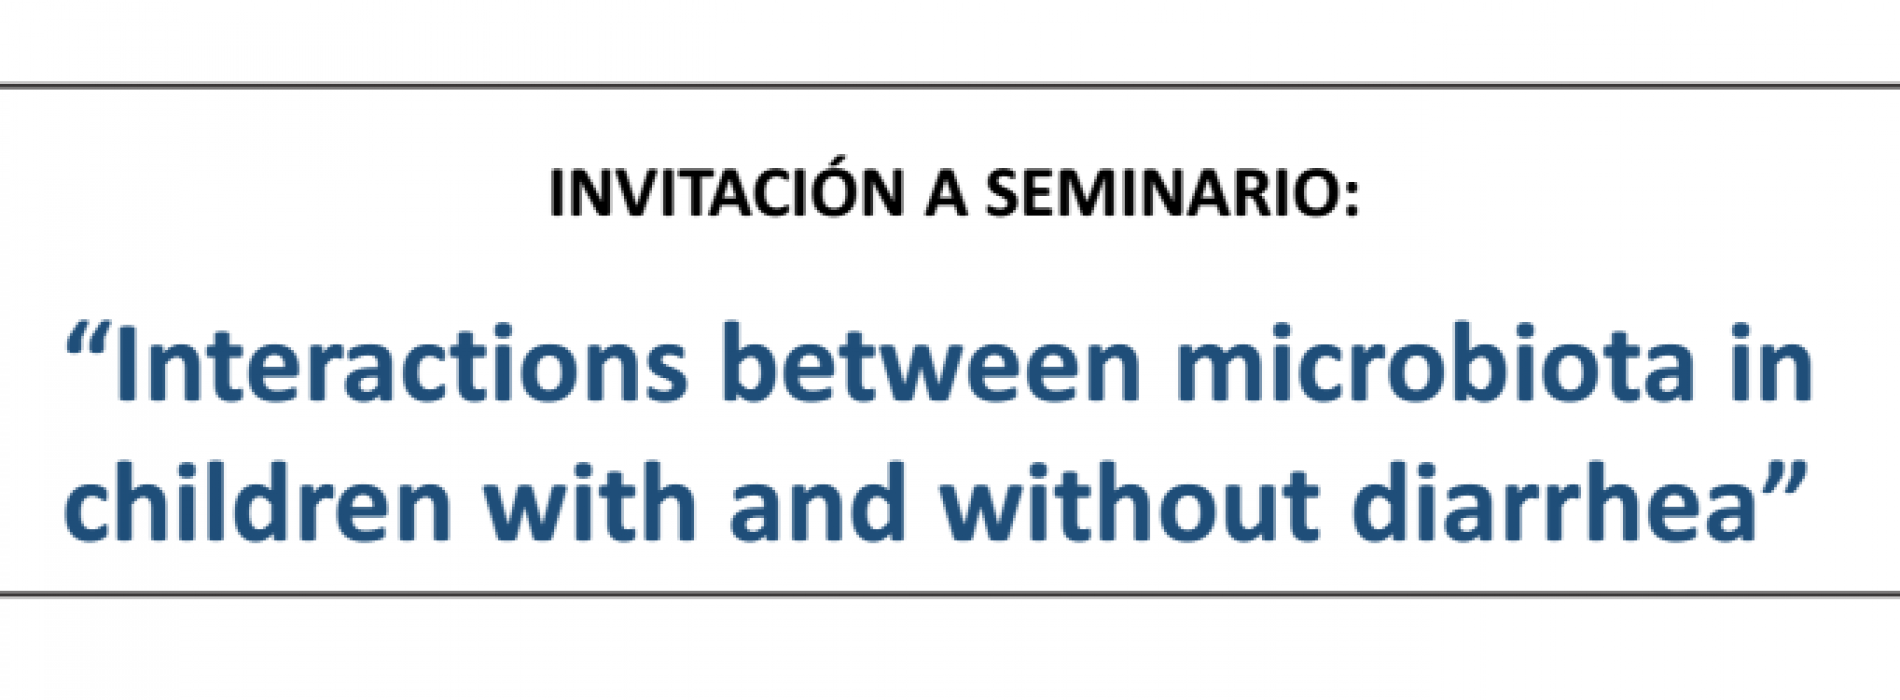 Seminario “Interactions Between Microbiota in Children with and Without Diarrhea”